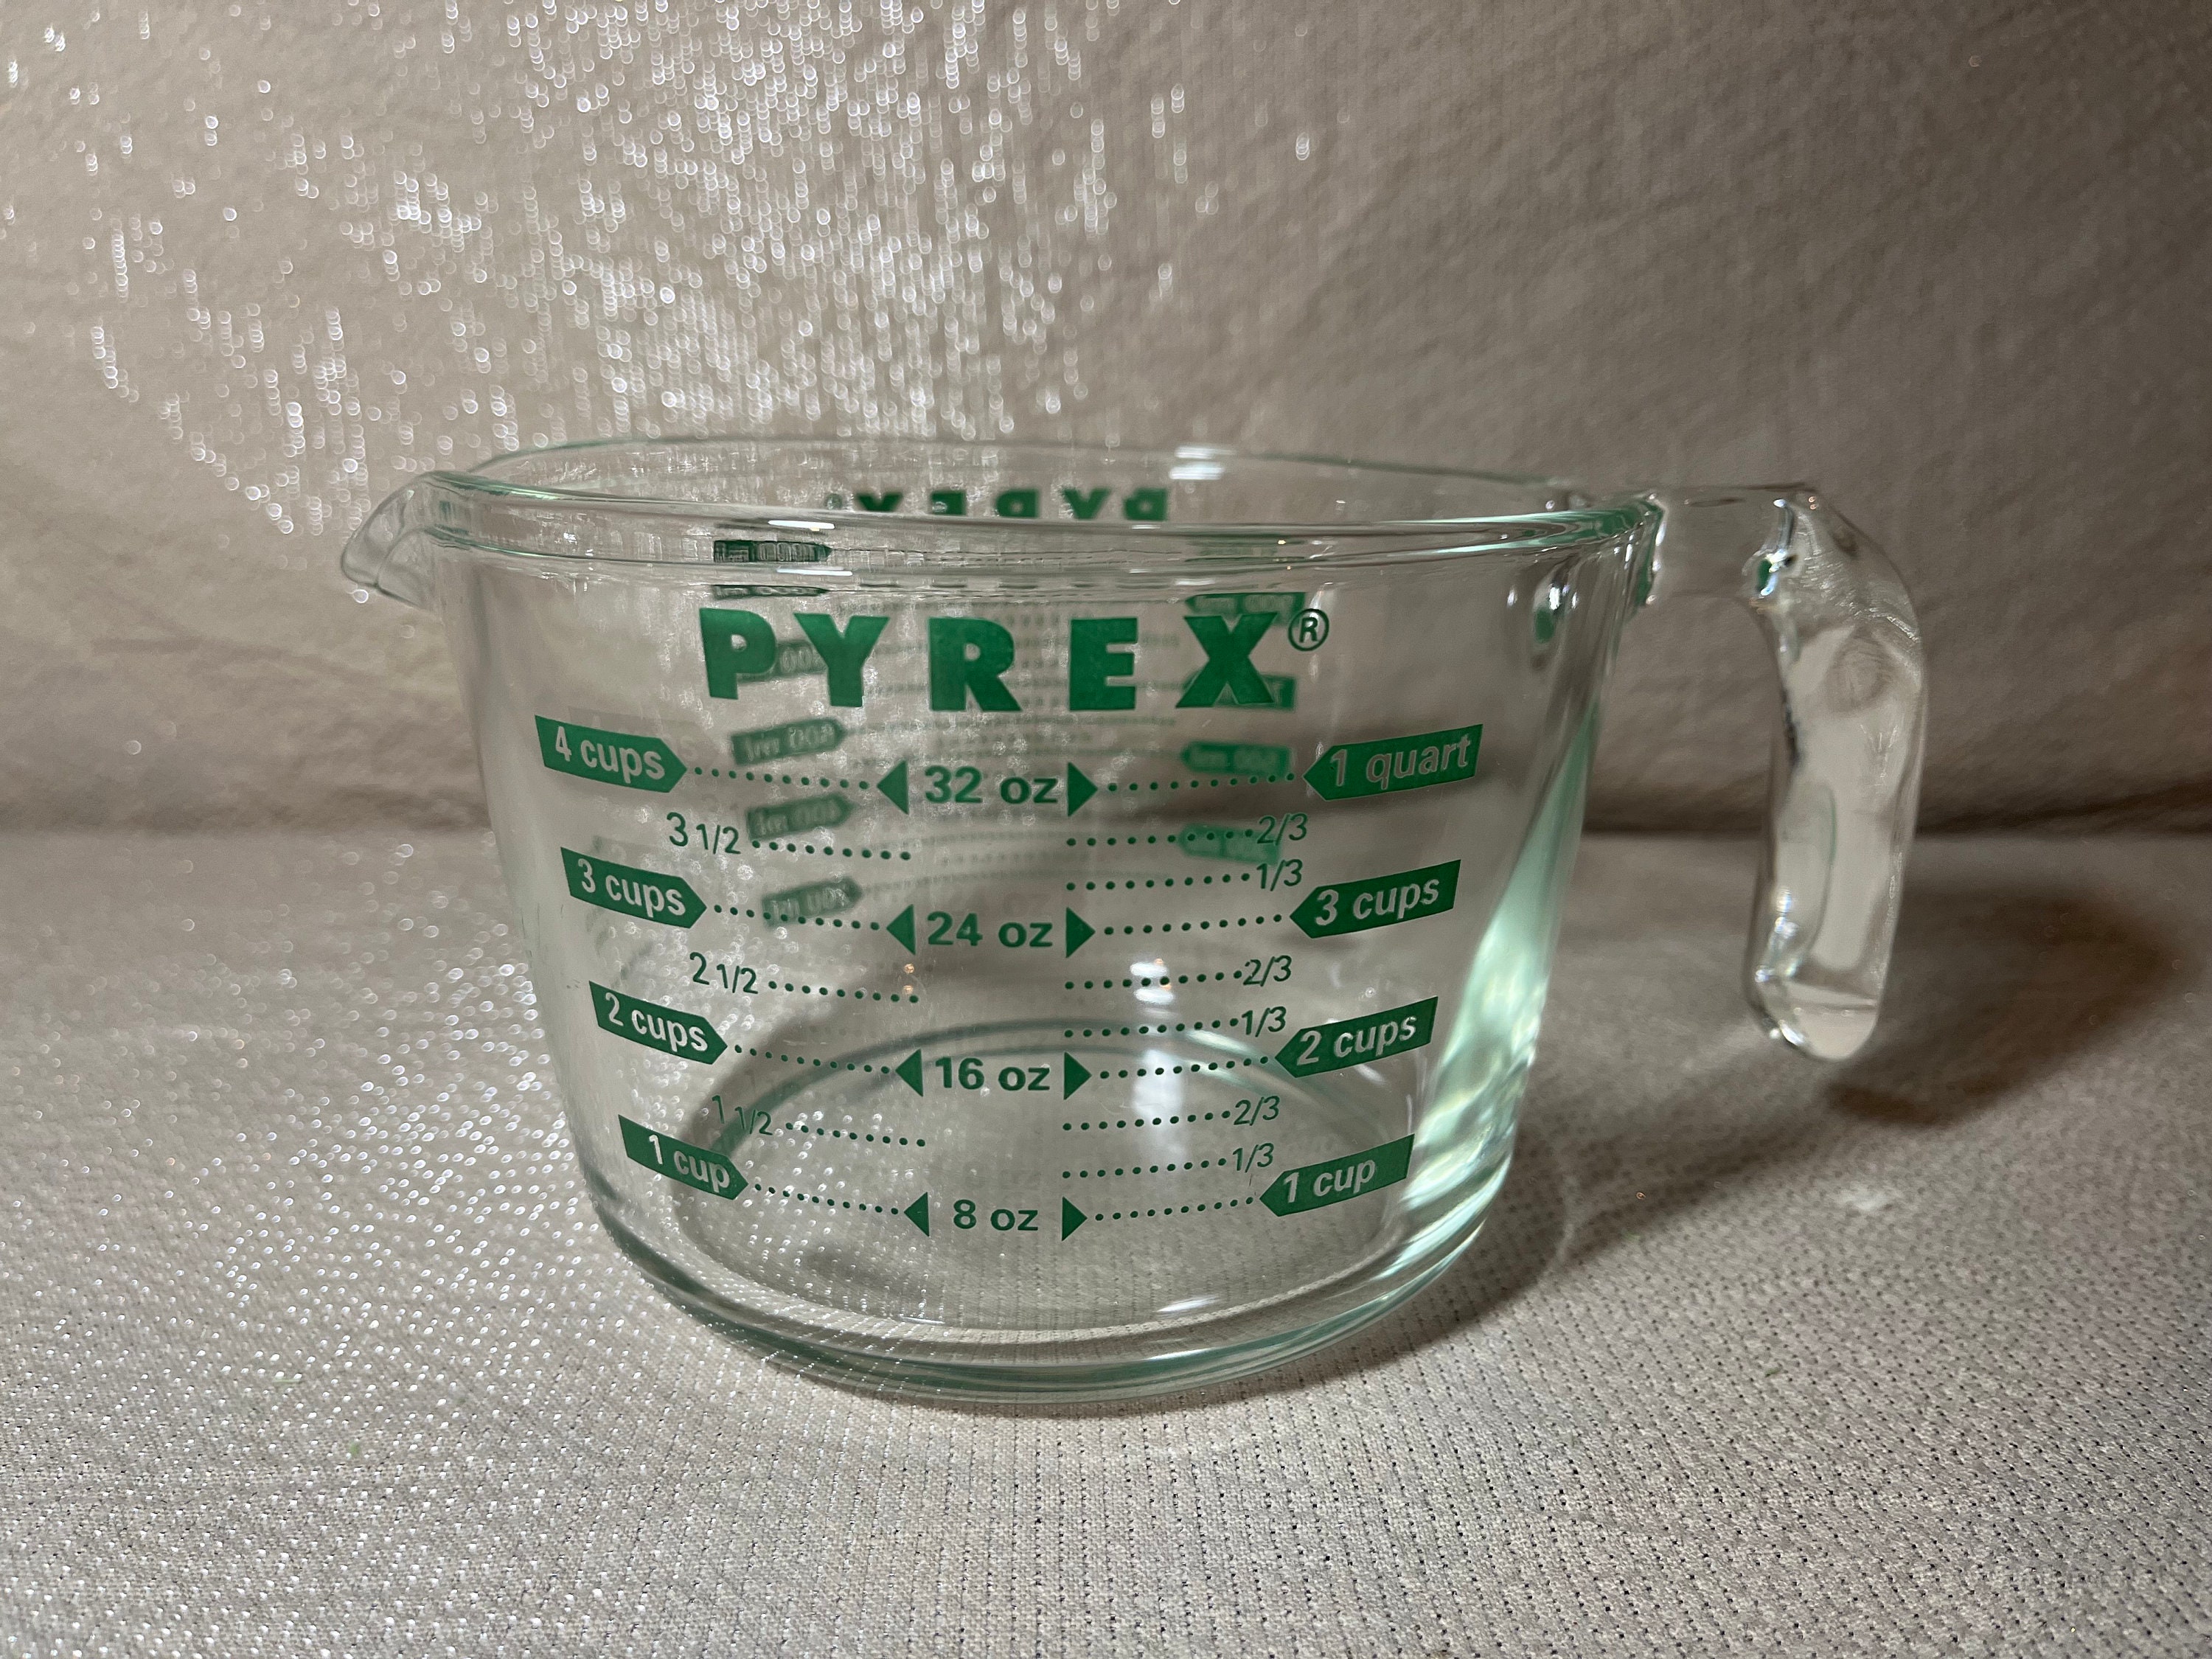 Vintage PYREX 1 Cup Measuring Cup Made in USA 